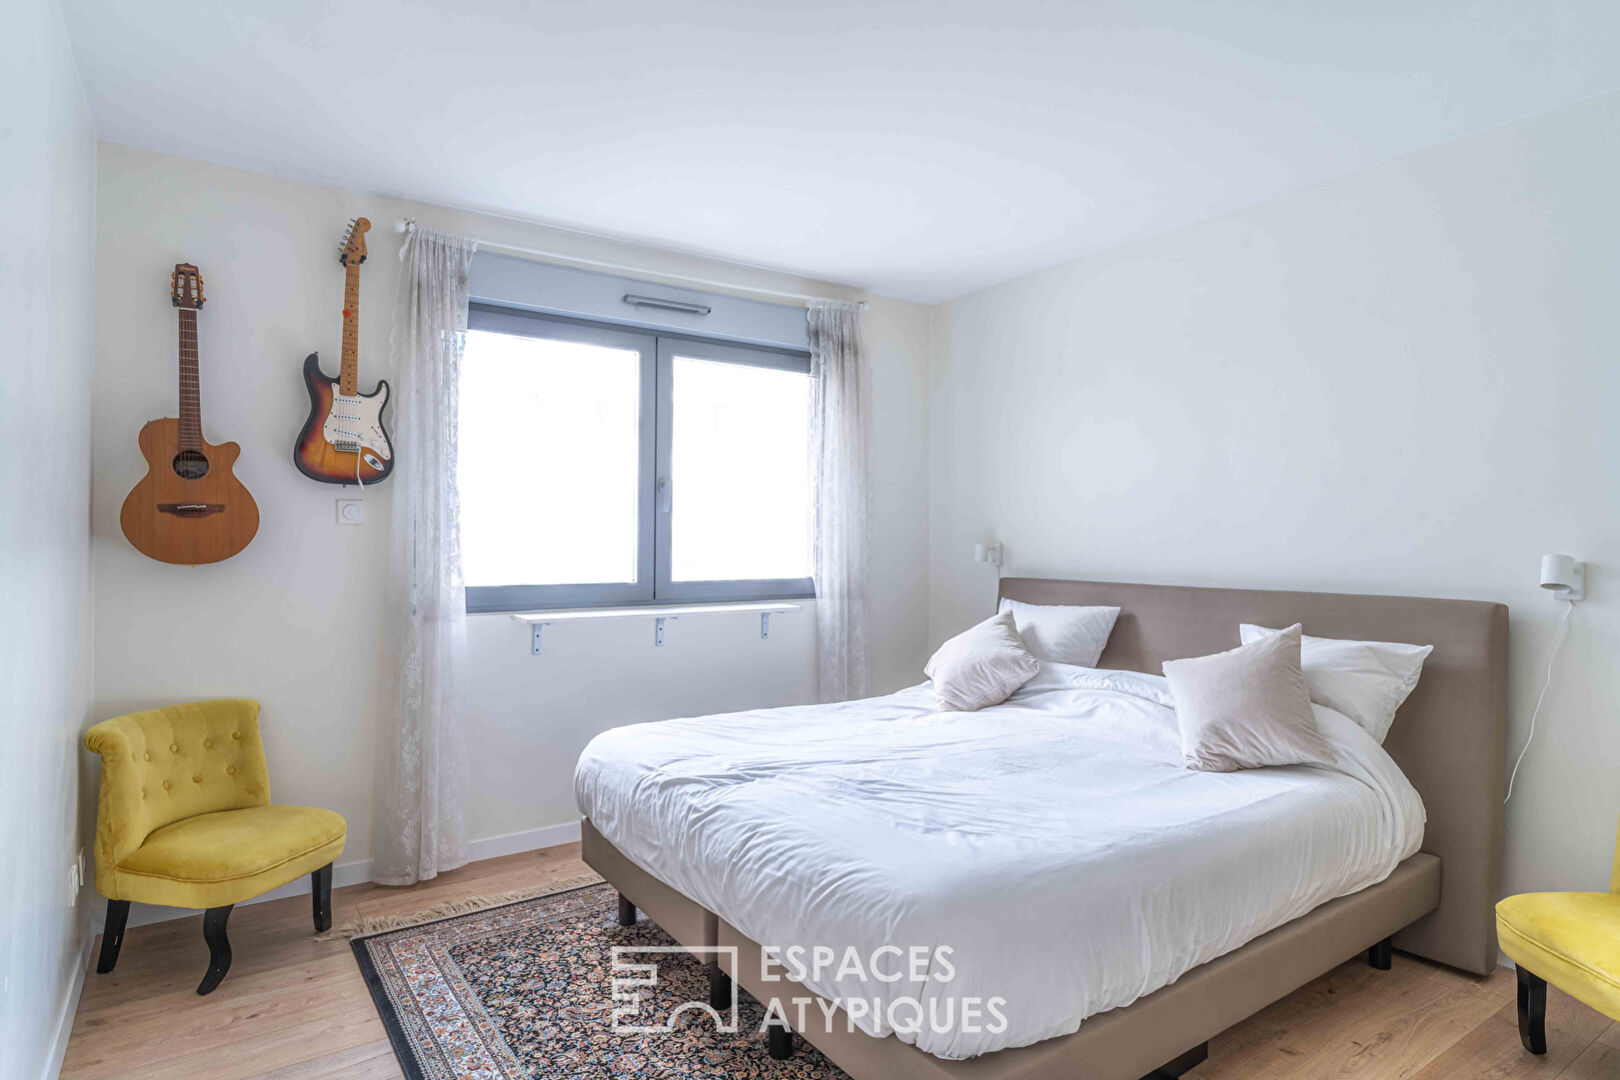 Renovated flat in the heart of the historic centre